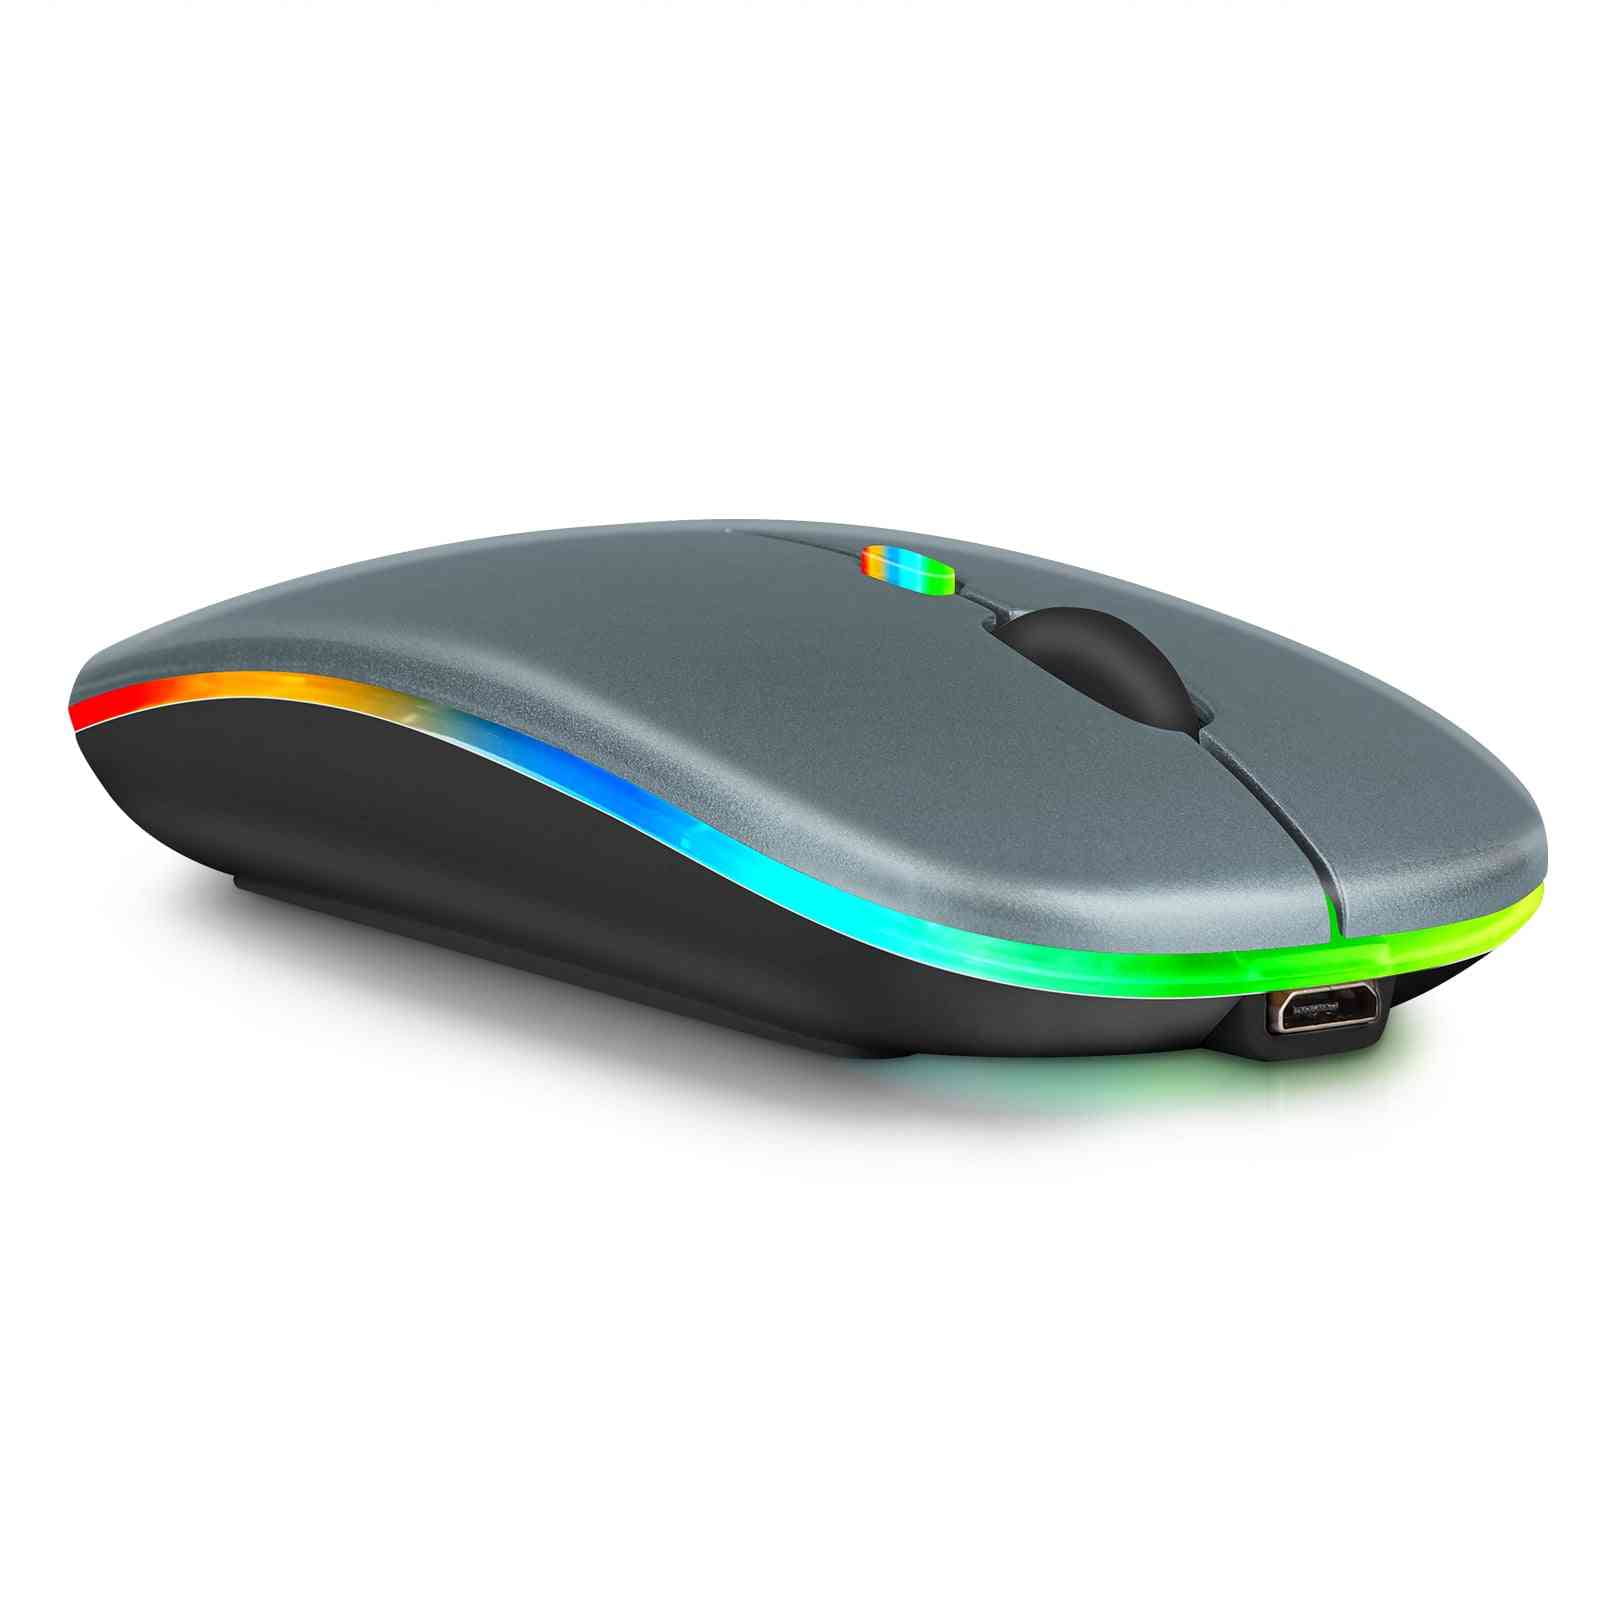 Xiaomi Wireless Mouse Lite - Simple and lightweight